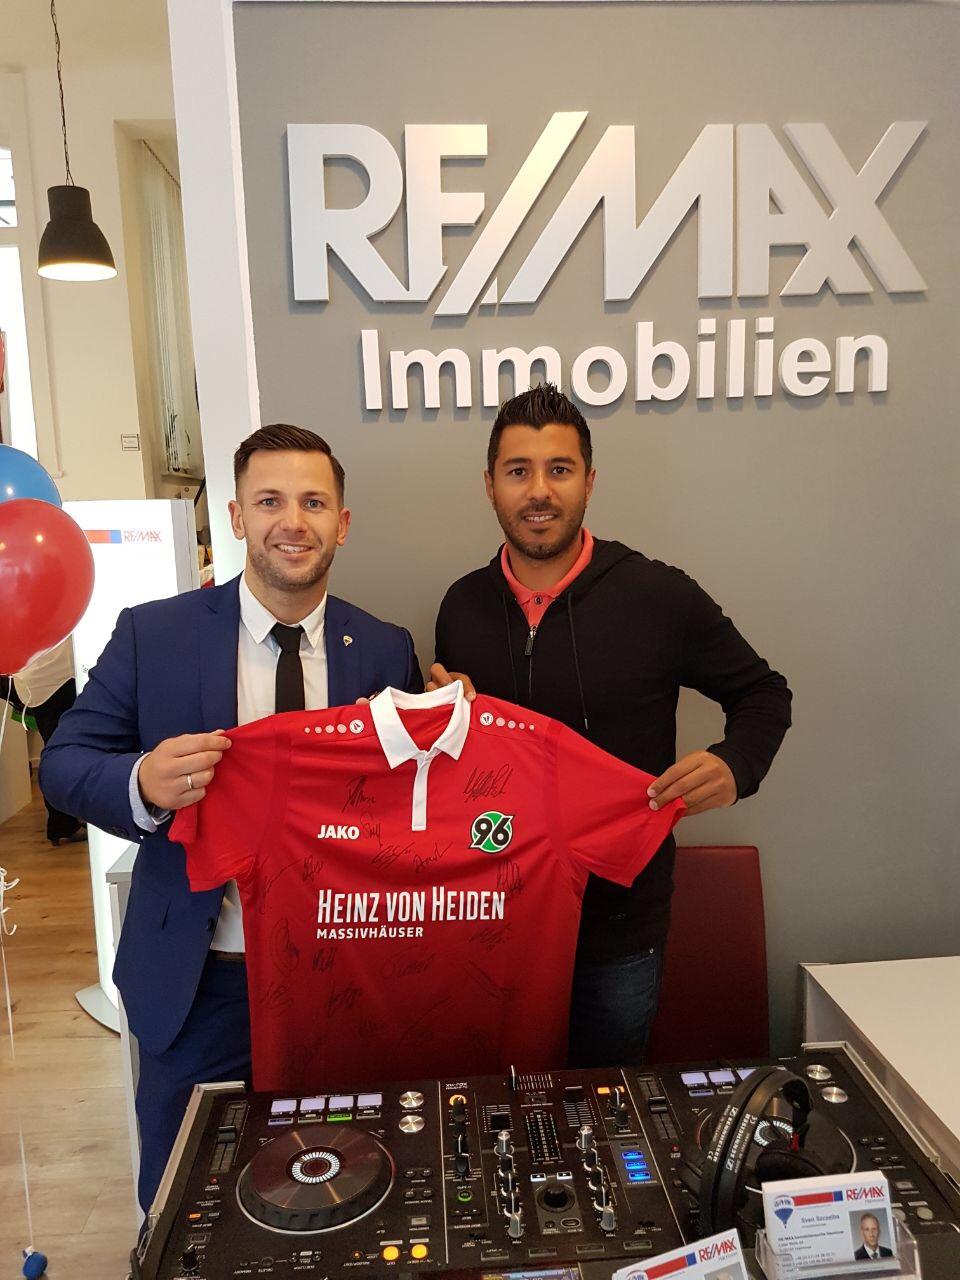 RE/MAX Immobilienmakler in Hannover, Lister Meile 84 in Hannover